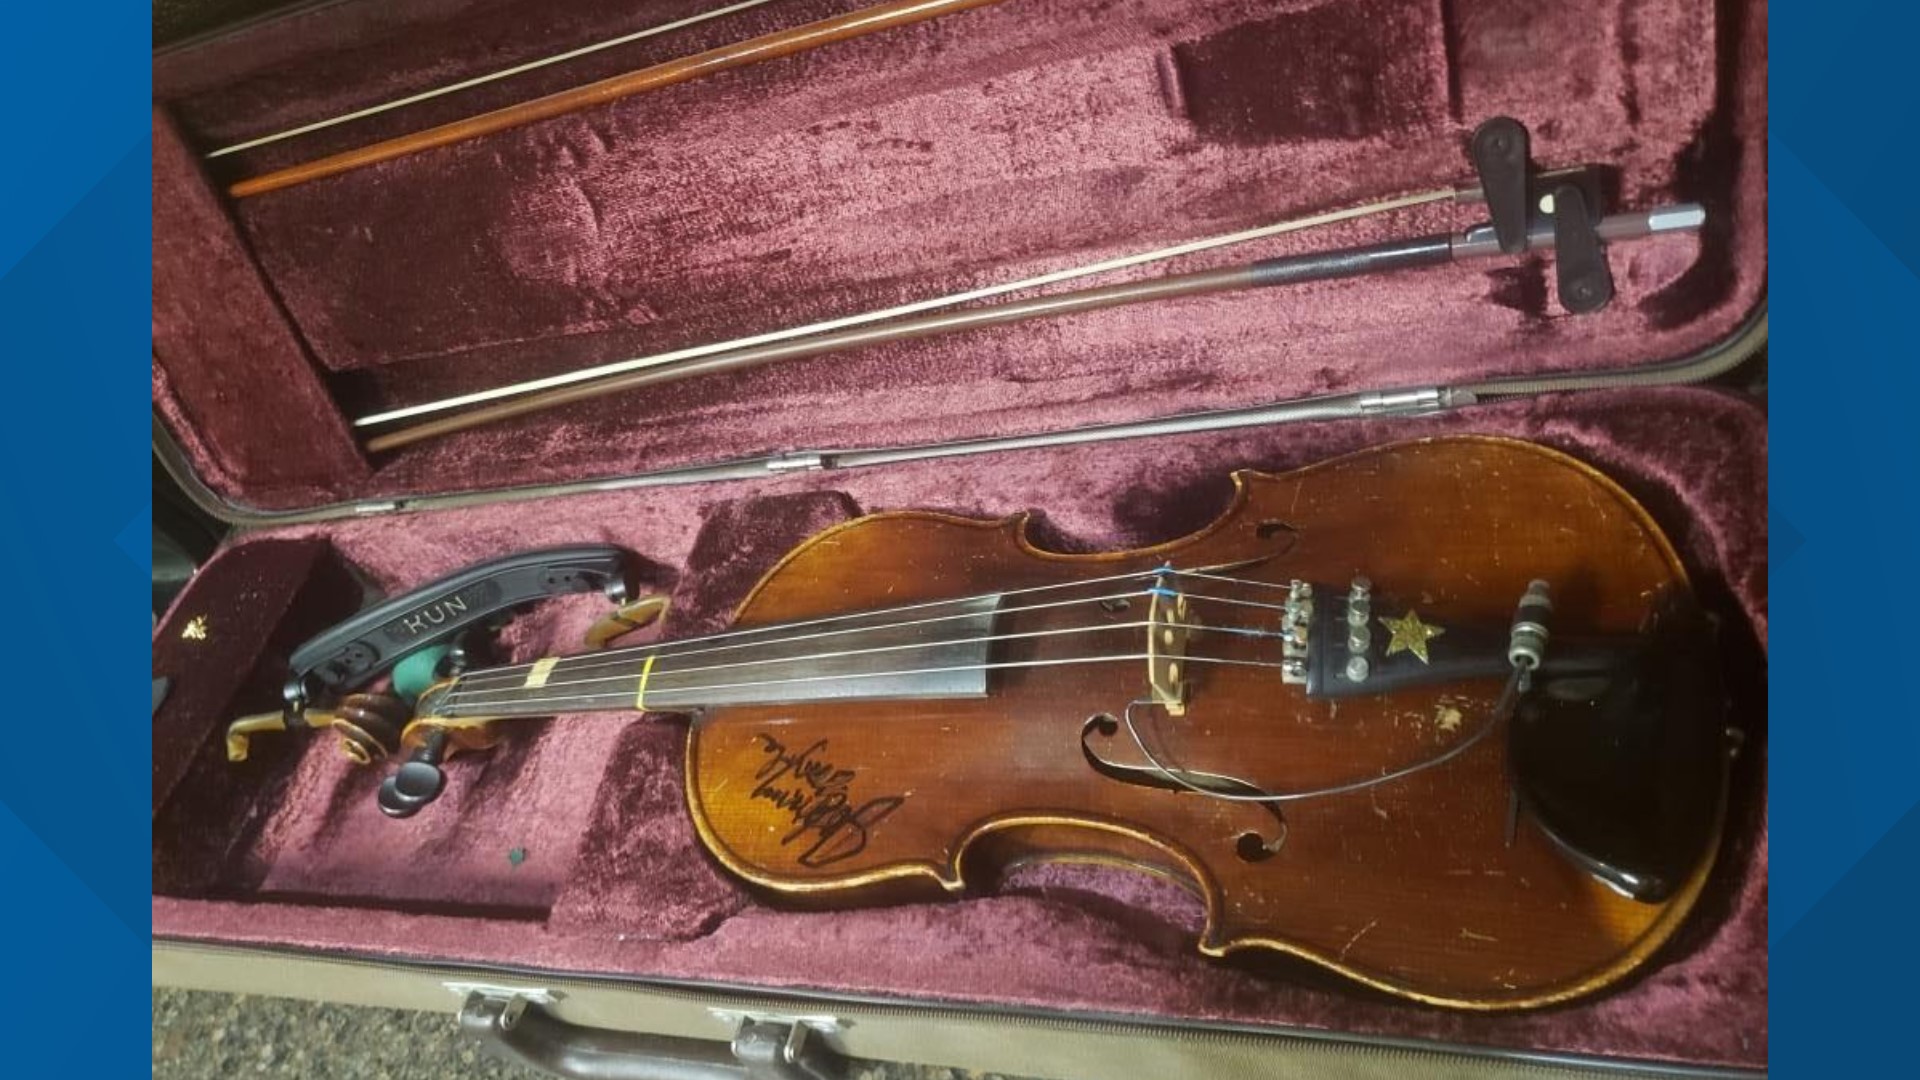 Fiddler Amber Dankert said the nearly 100-year-old fiddle was returned anonymously.